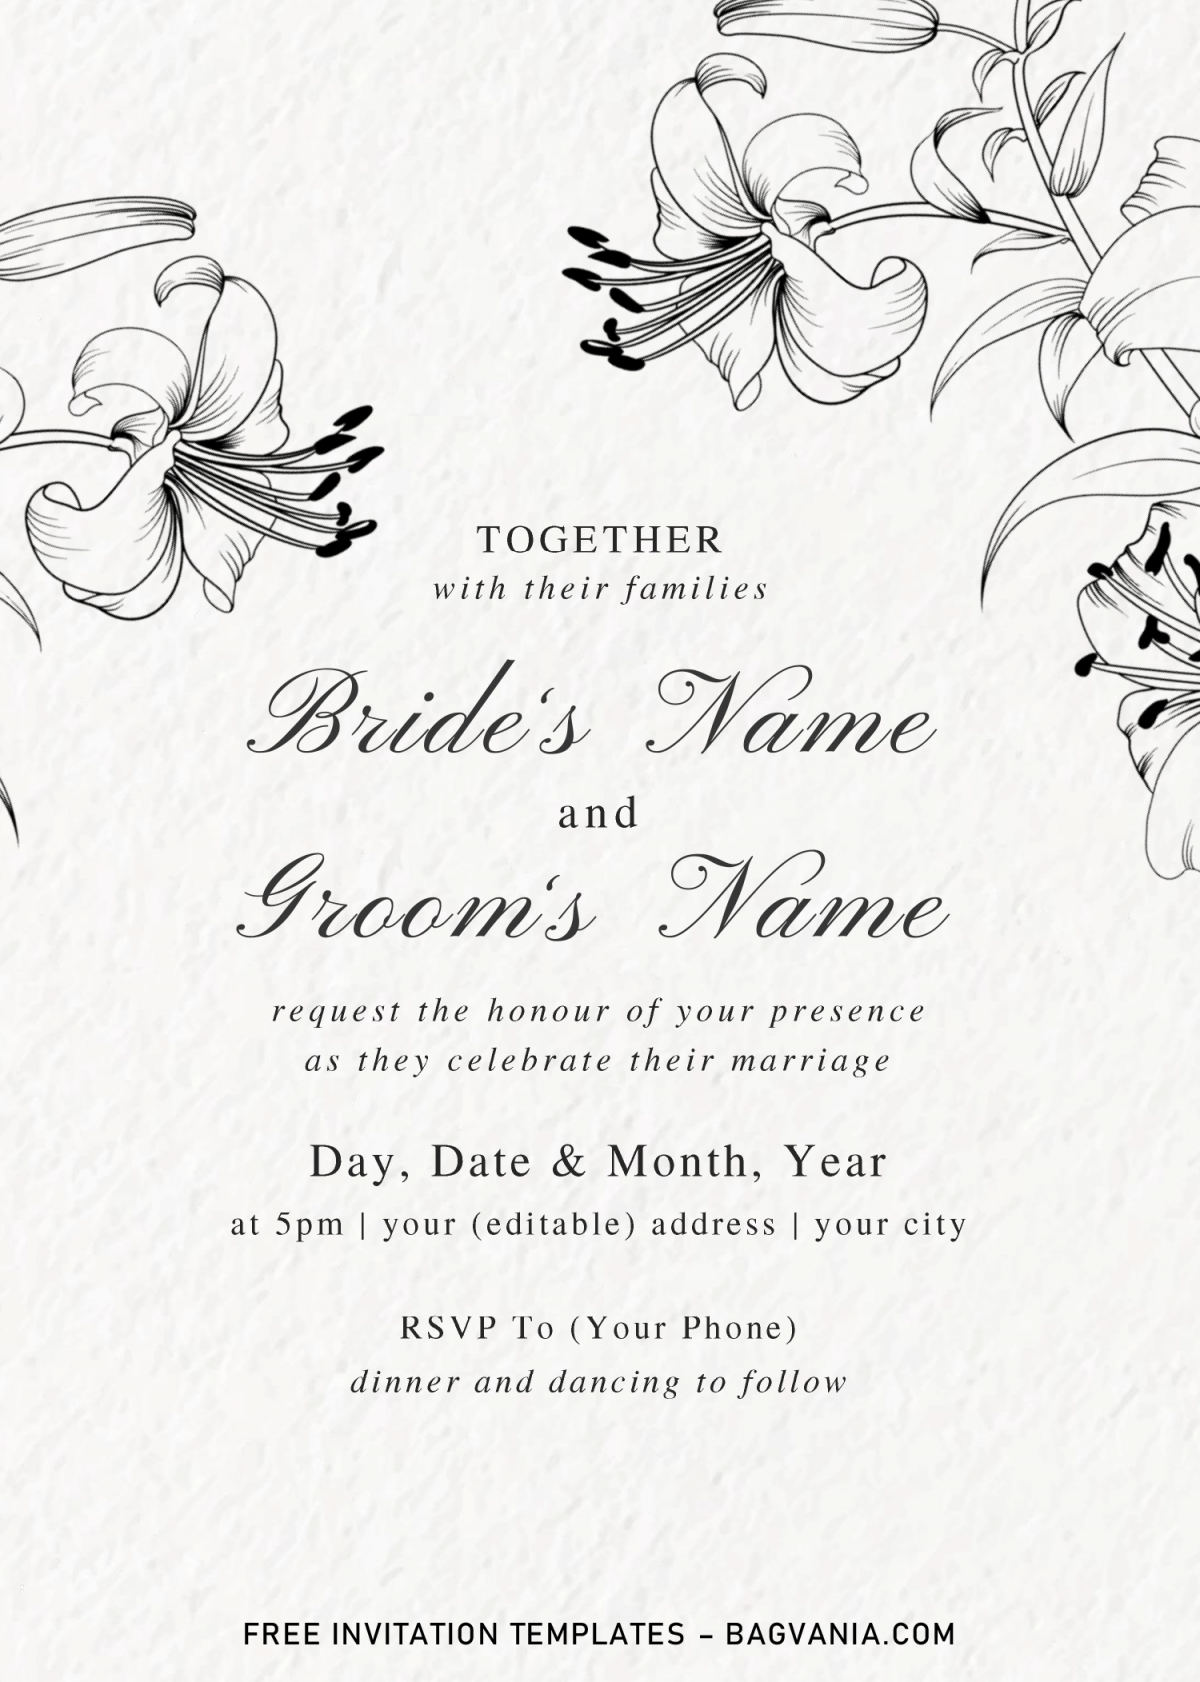 Botanical Branches Invitation Templates - Editable .Docx and has six different designs